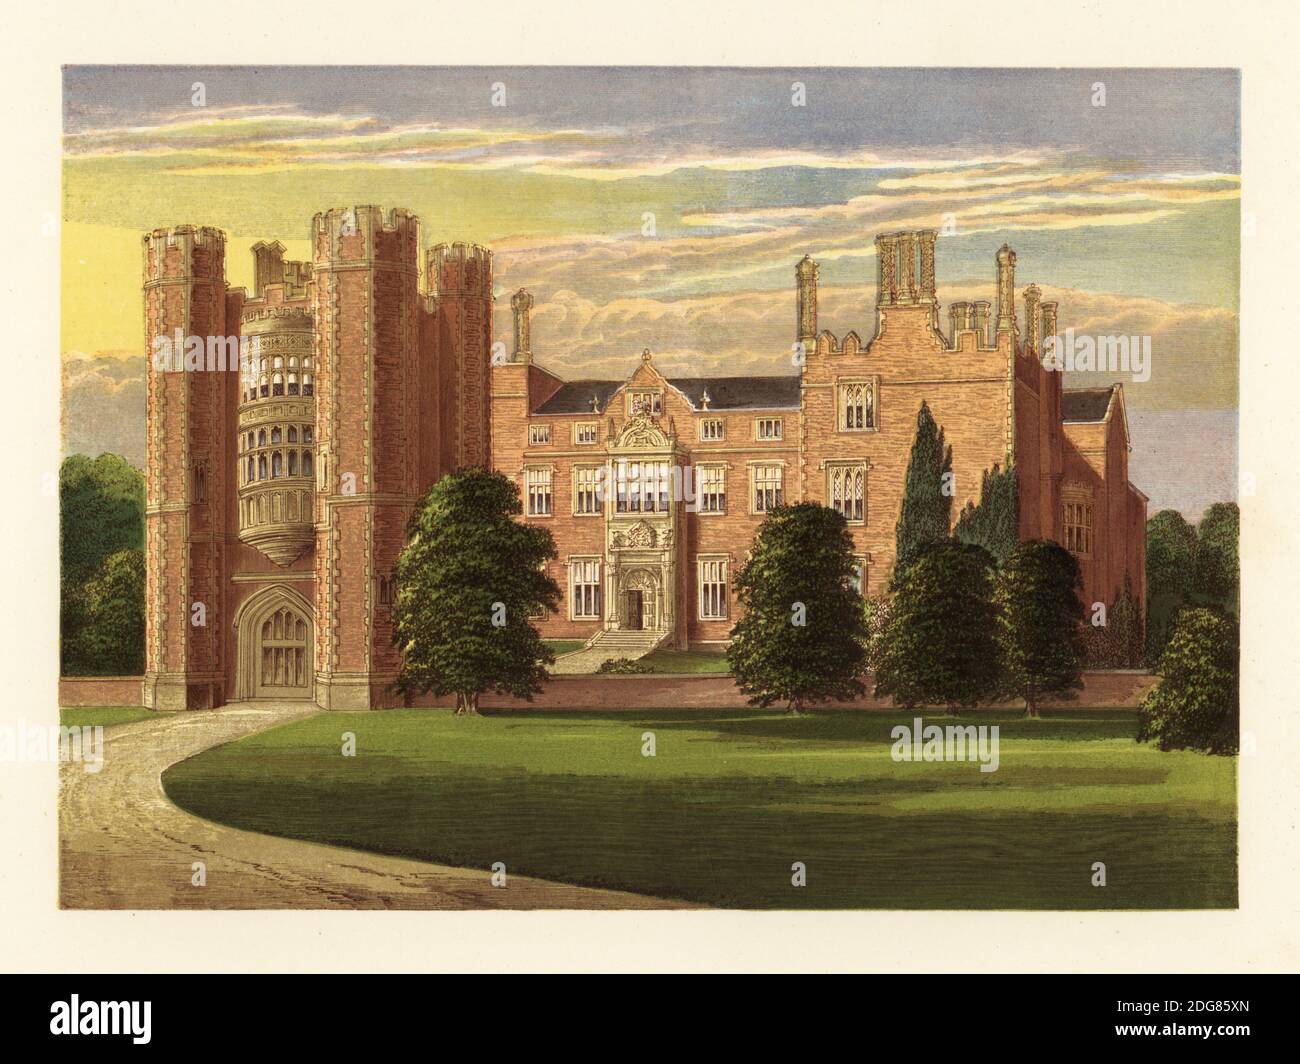 Kirtling Tower, Cambridgeshire, England. Tudor castle pulled down in 1801 apart from the castellated tower which was built for Edward North, 1st Baron North, by Richard Rich, 1st Baron Rich. Colour woodblock by Benjamin Fawcett in the Baxter process of an illustration by Alexander Francis Lydon from Reverend Francis Orpen Morris’s A Series of Picturesque Views of the Seats of Noblemen and Gentlemen of Great Britain and Ireland, William Mackenzie, London, 1870. Stock Photo